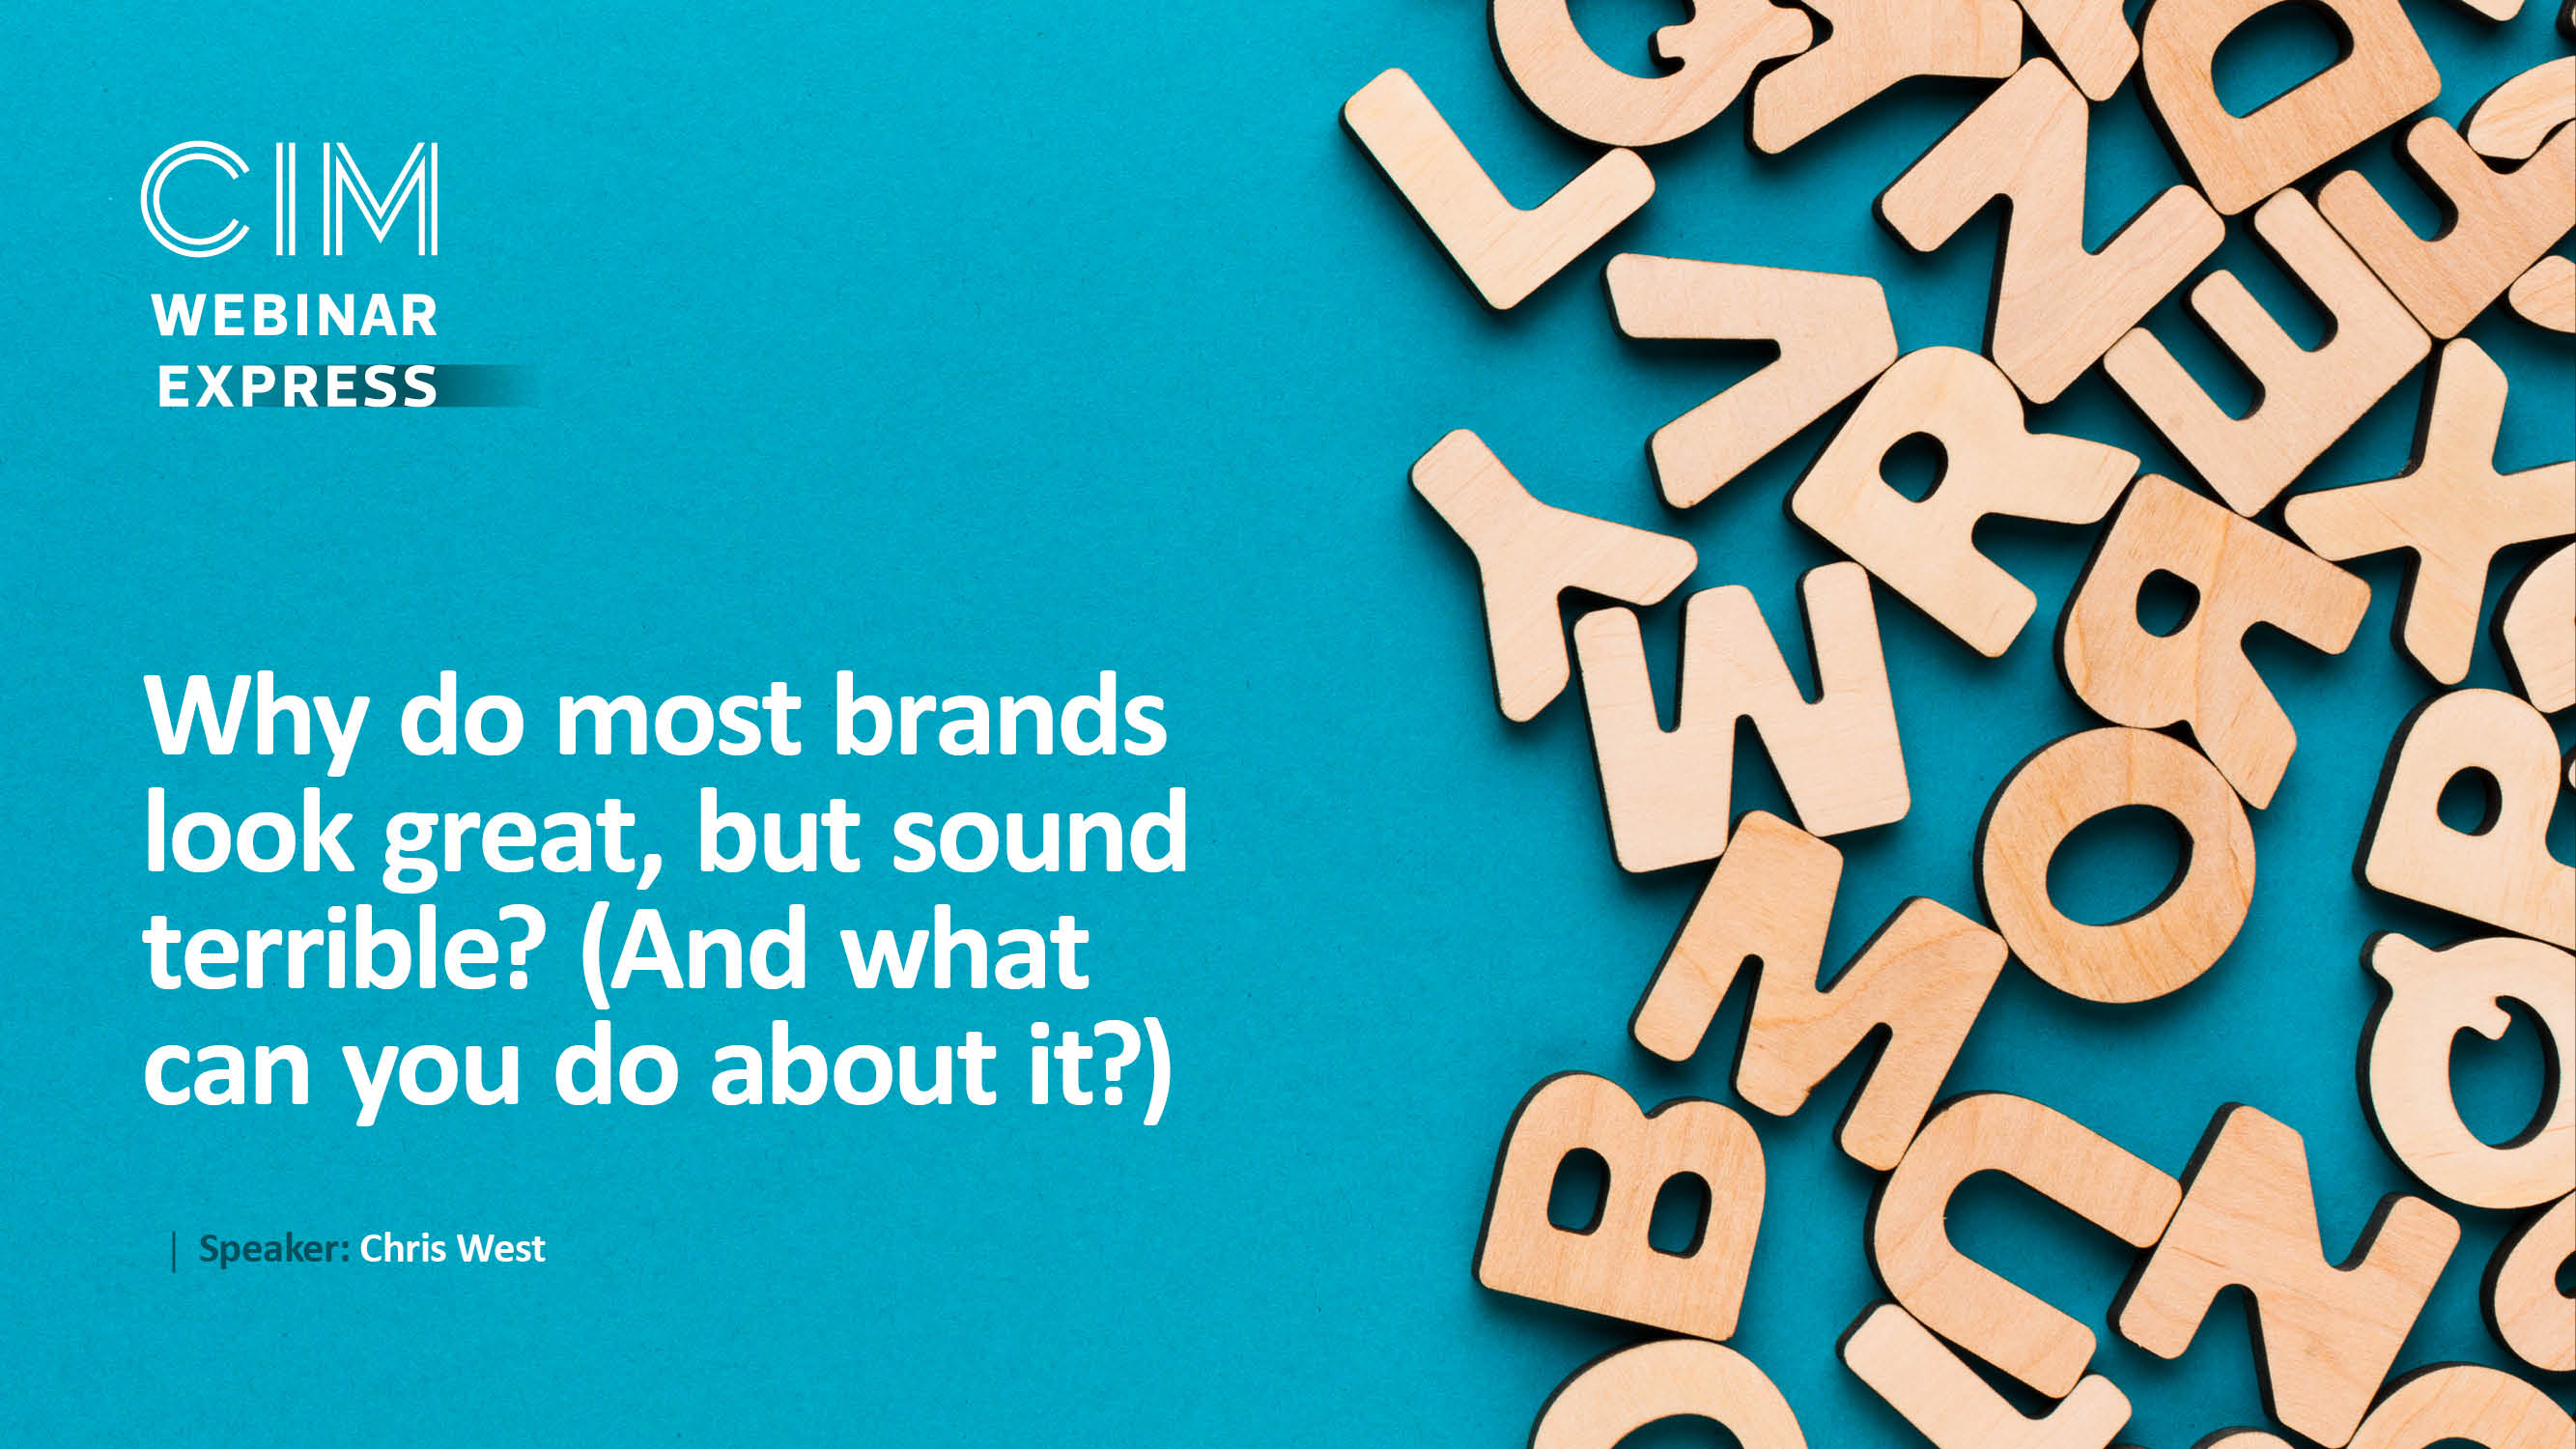 Why do most brands look great, but sound terrible…and what can you do about it?